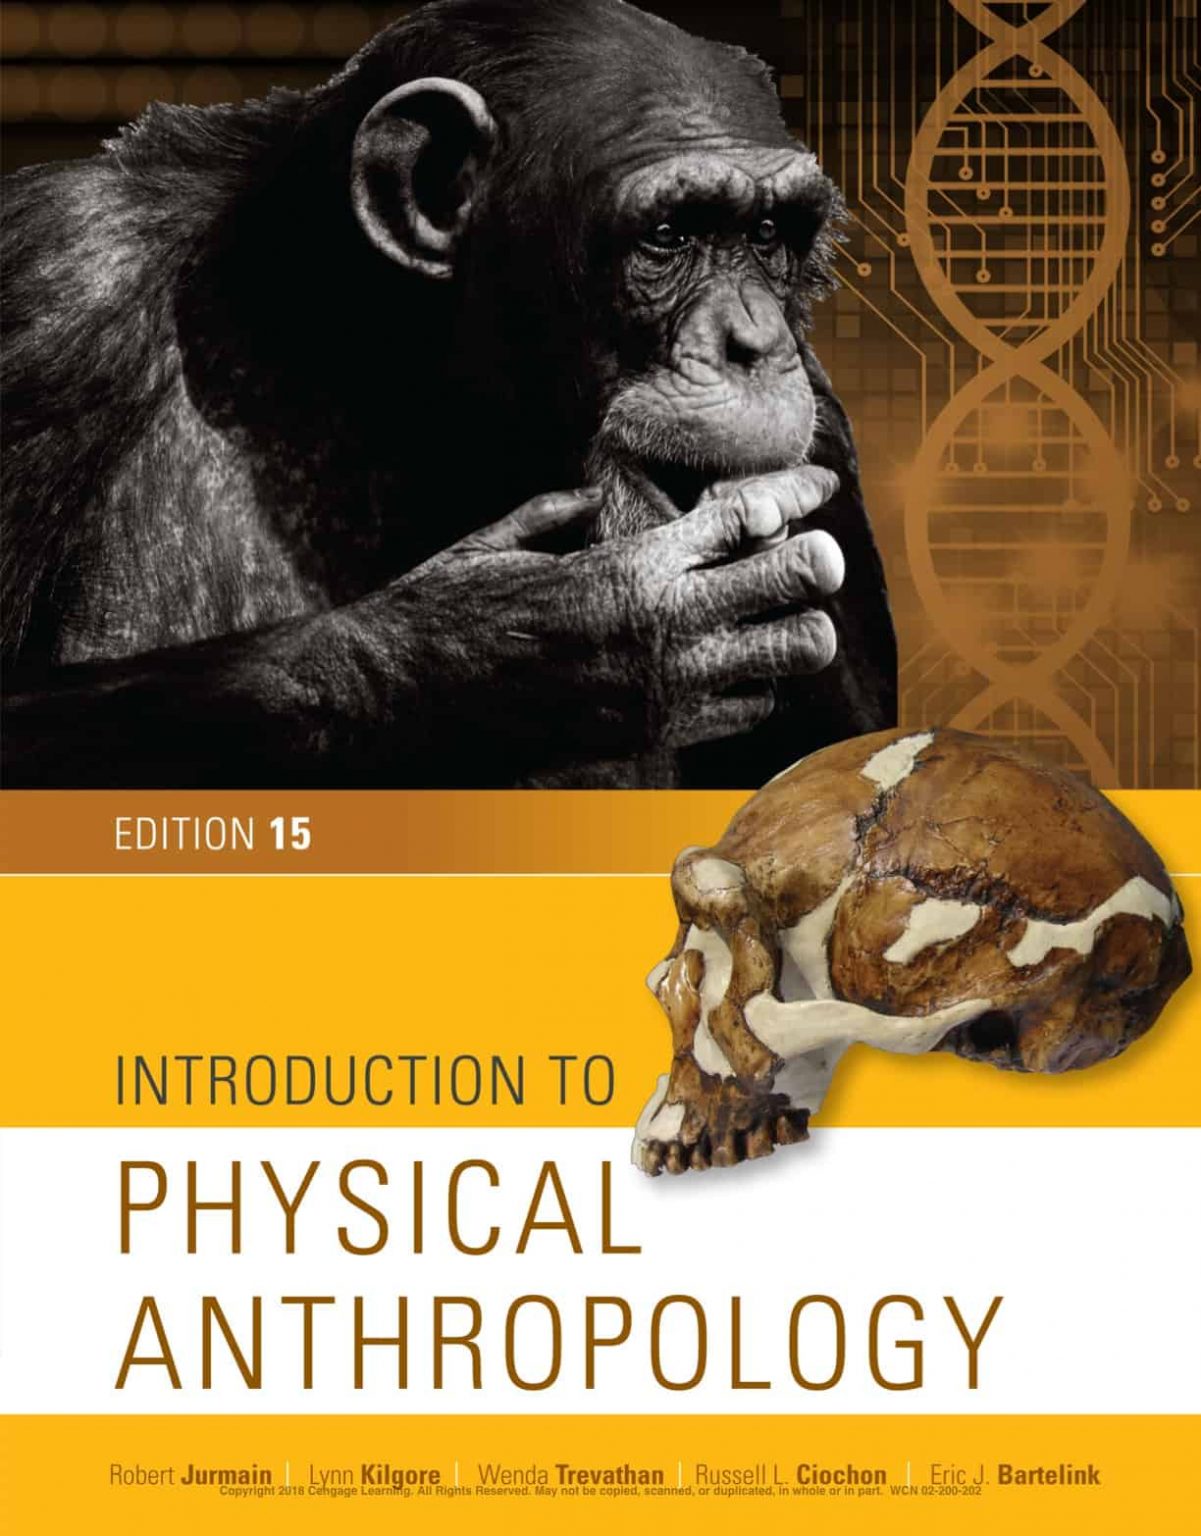 book review anthropology